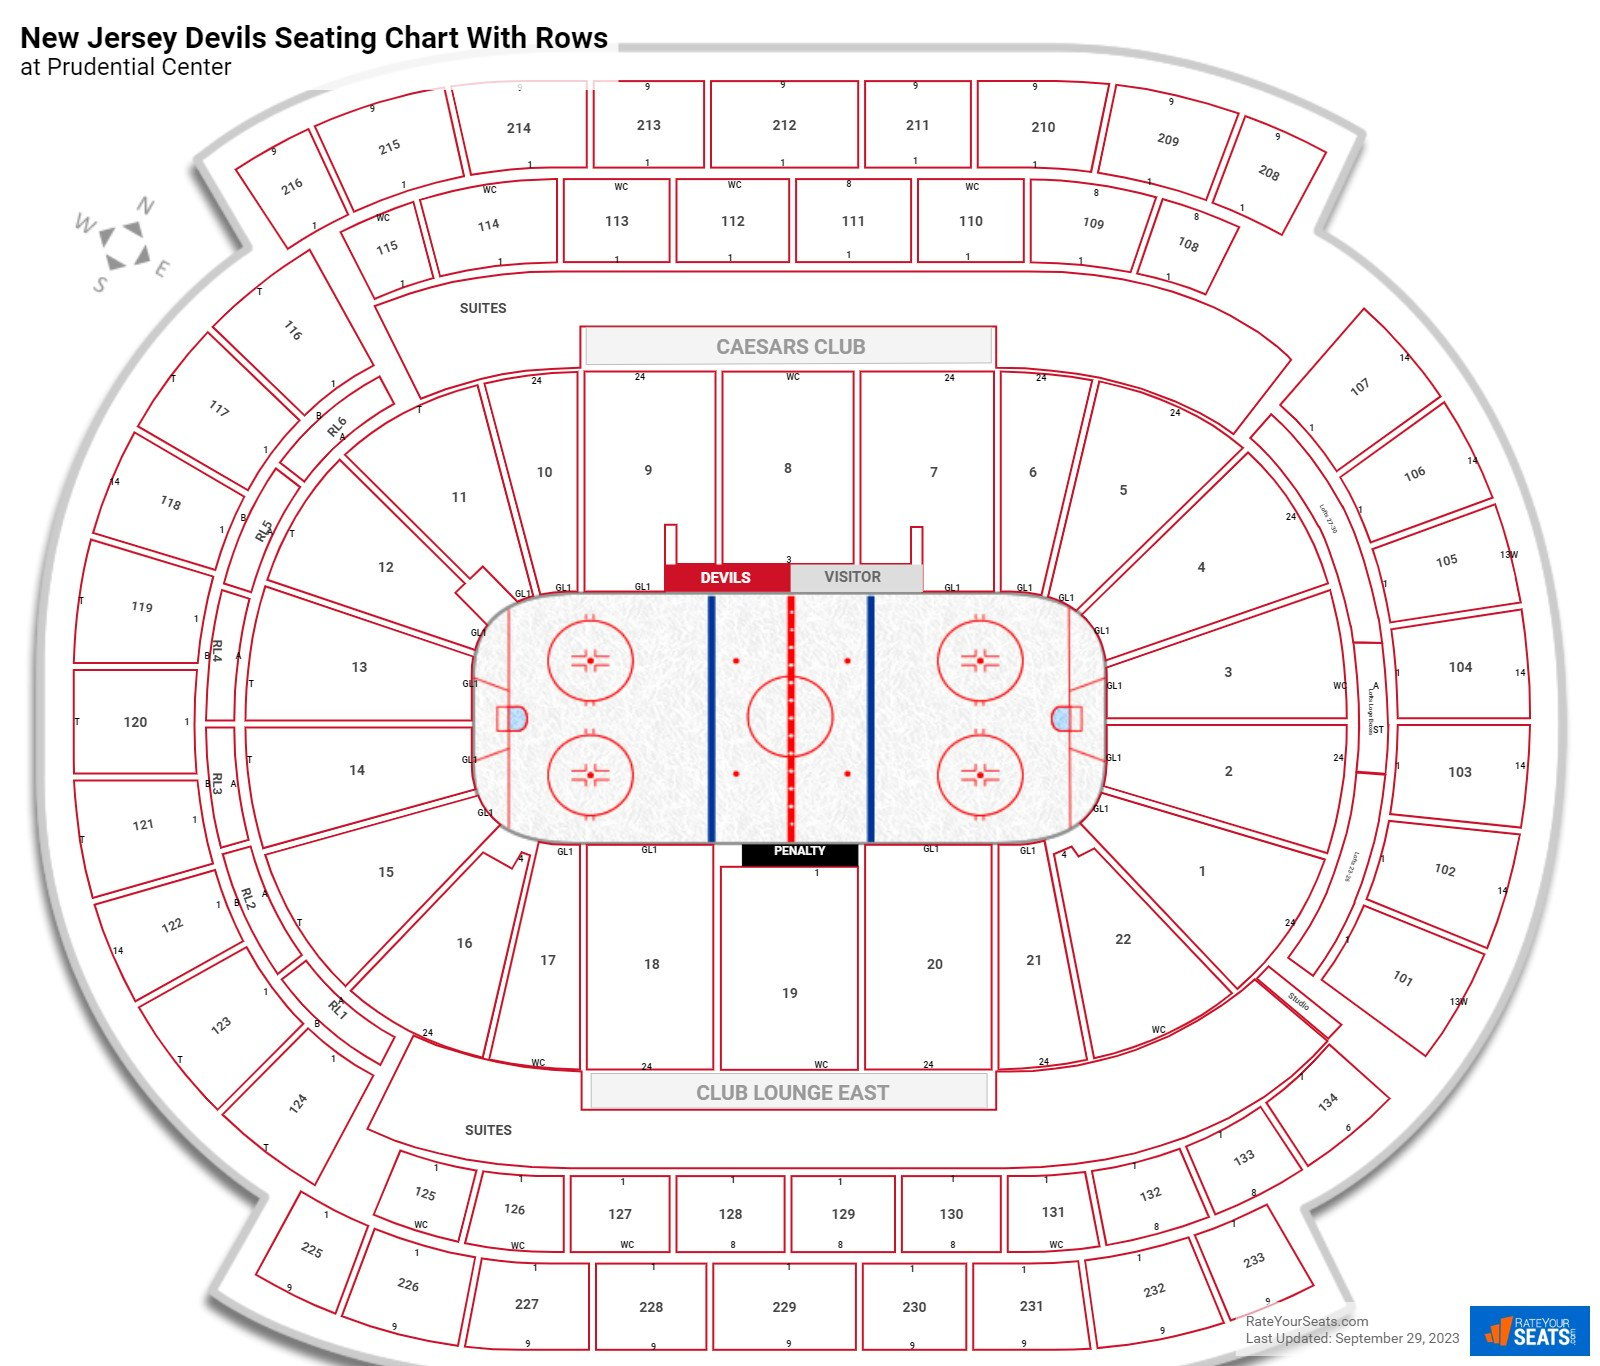 Prudential Center Seating 